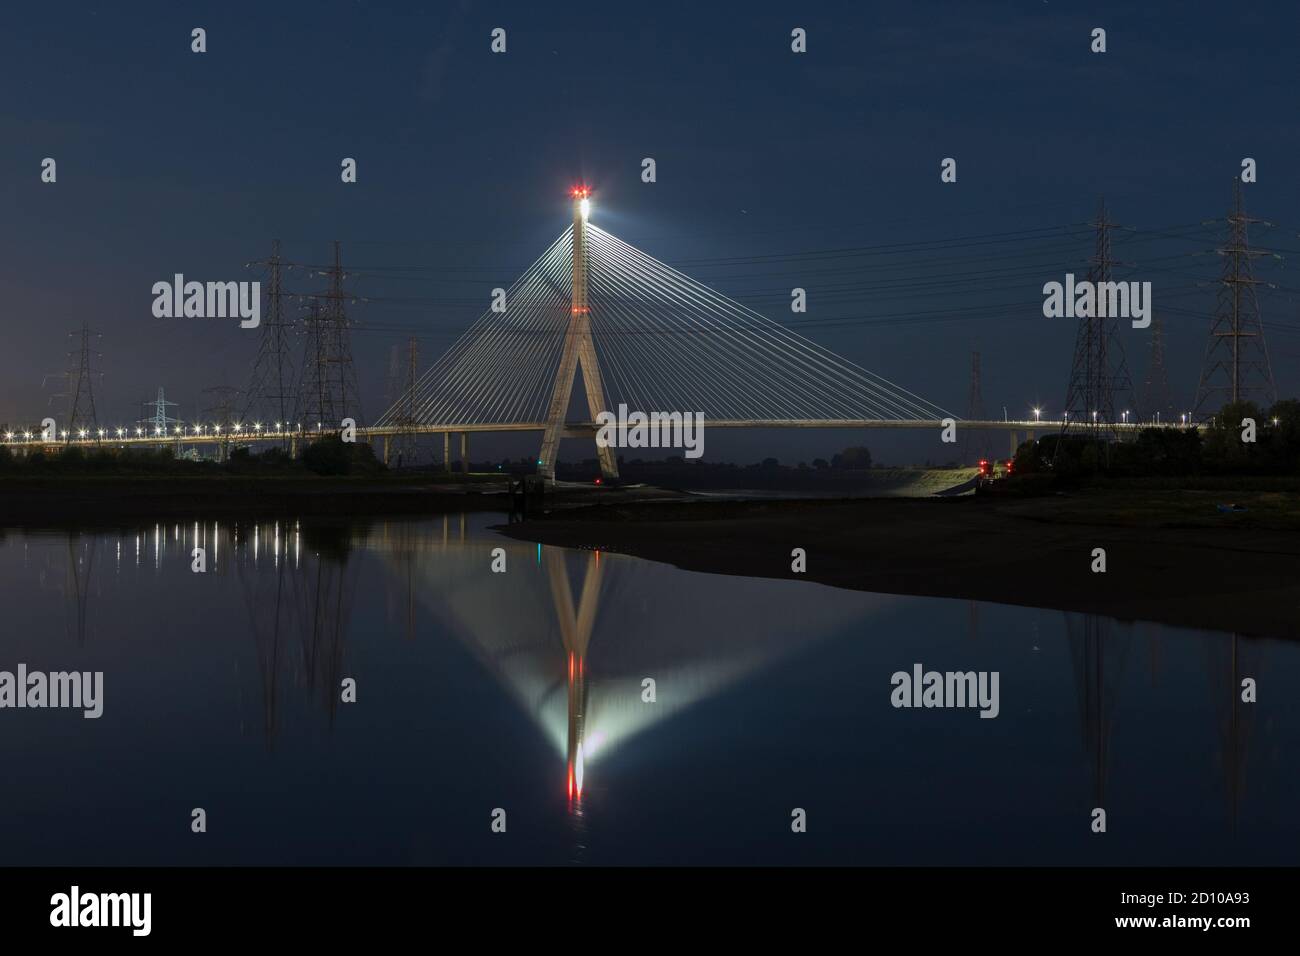 Cable-stayed concrete Flintshire Bridge,lit at night, spanning River Dee viewed from Connah's Quay. Fan like structure reflected in mirrored Estuary Stock Photo